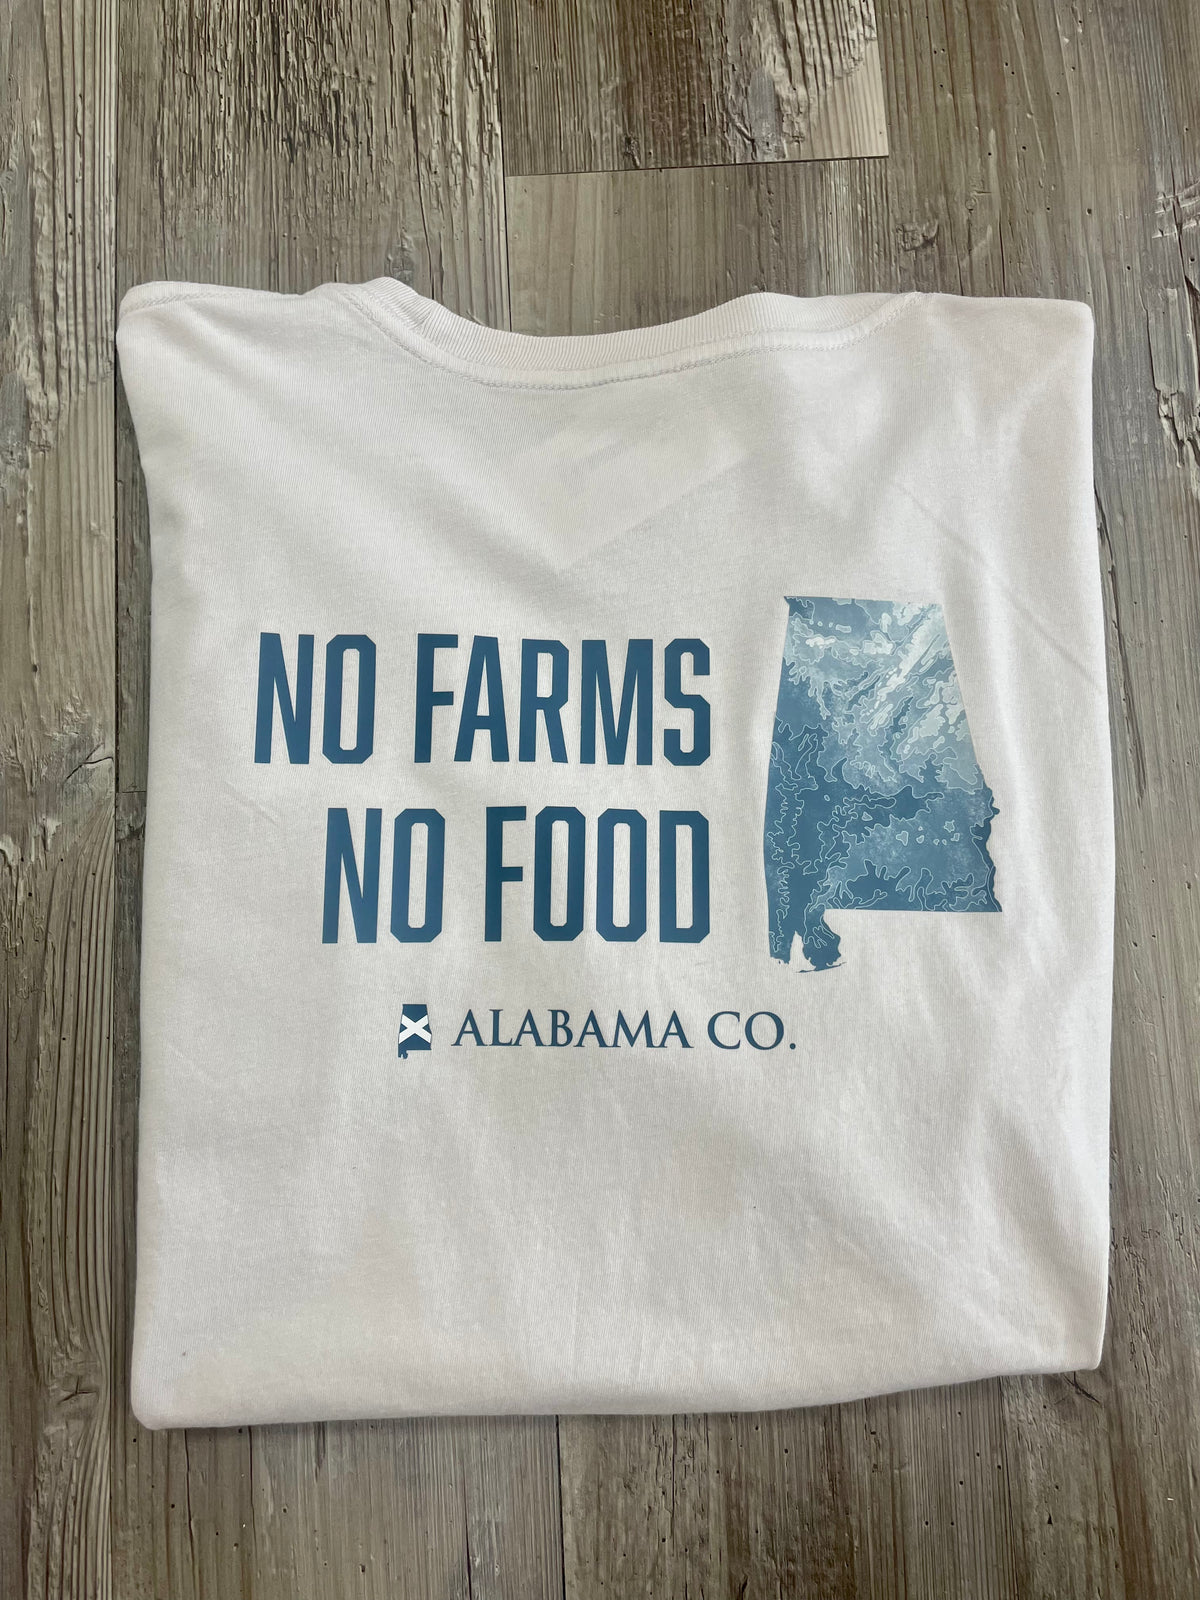 State Co No Farms No Food S/S